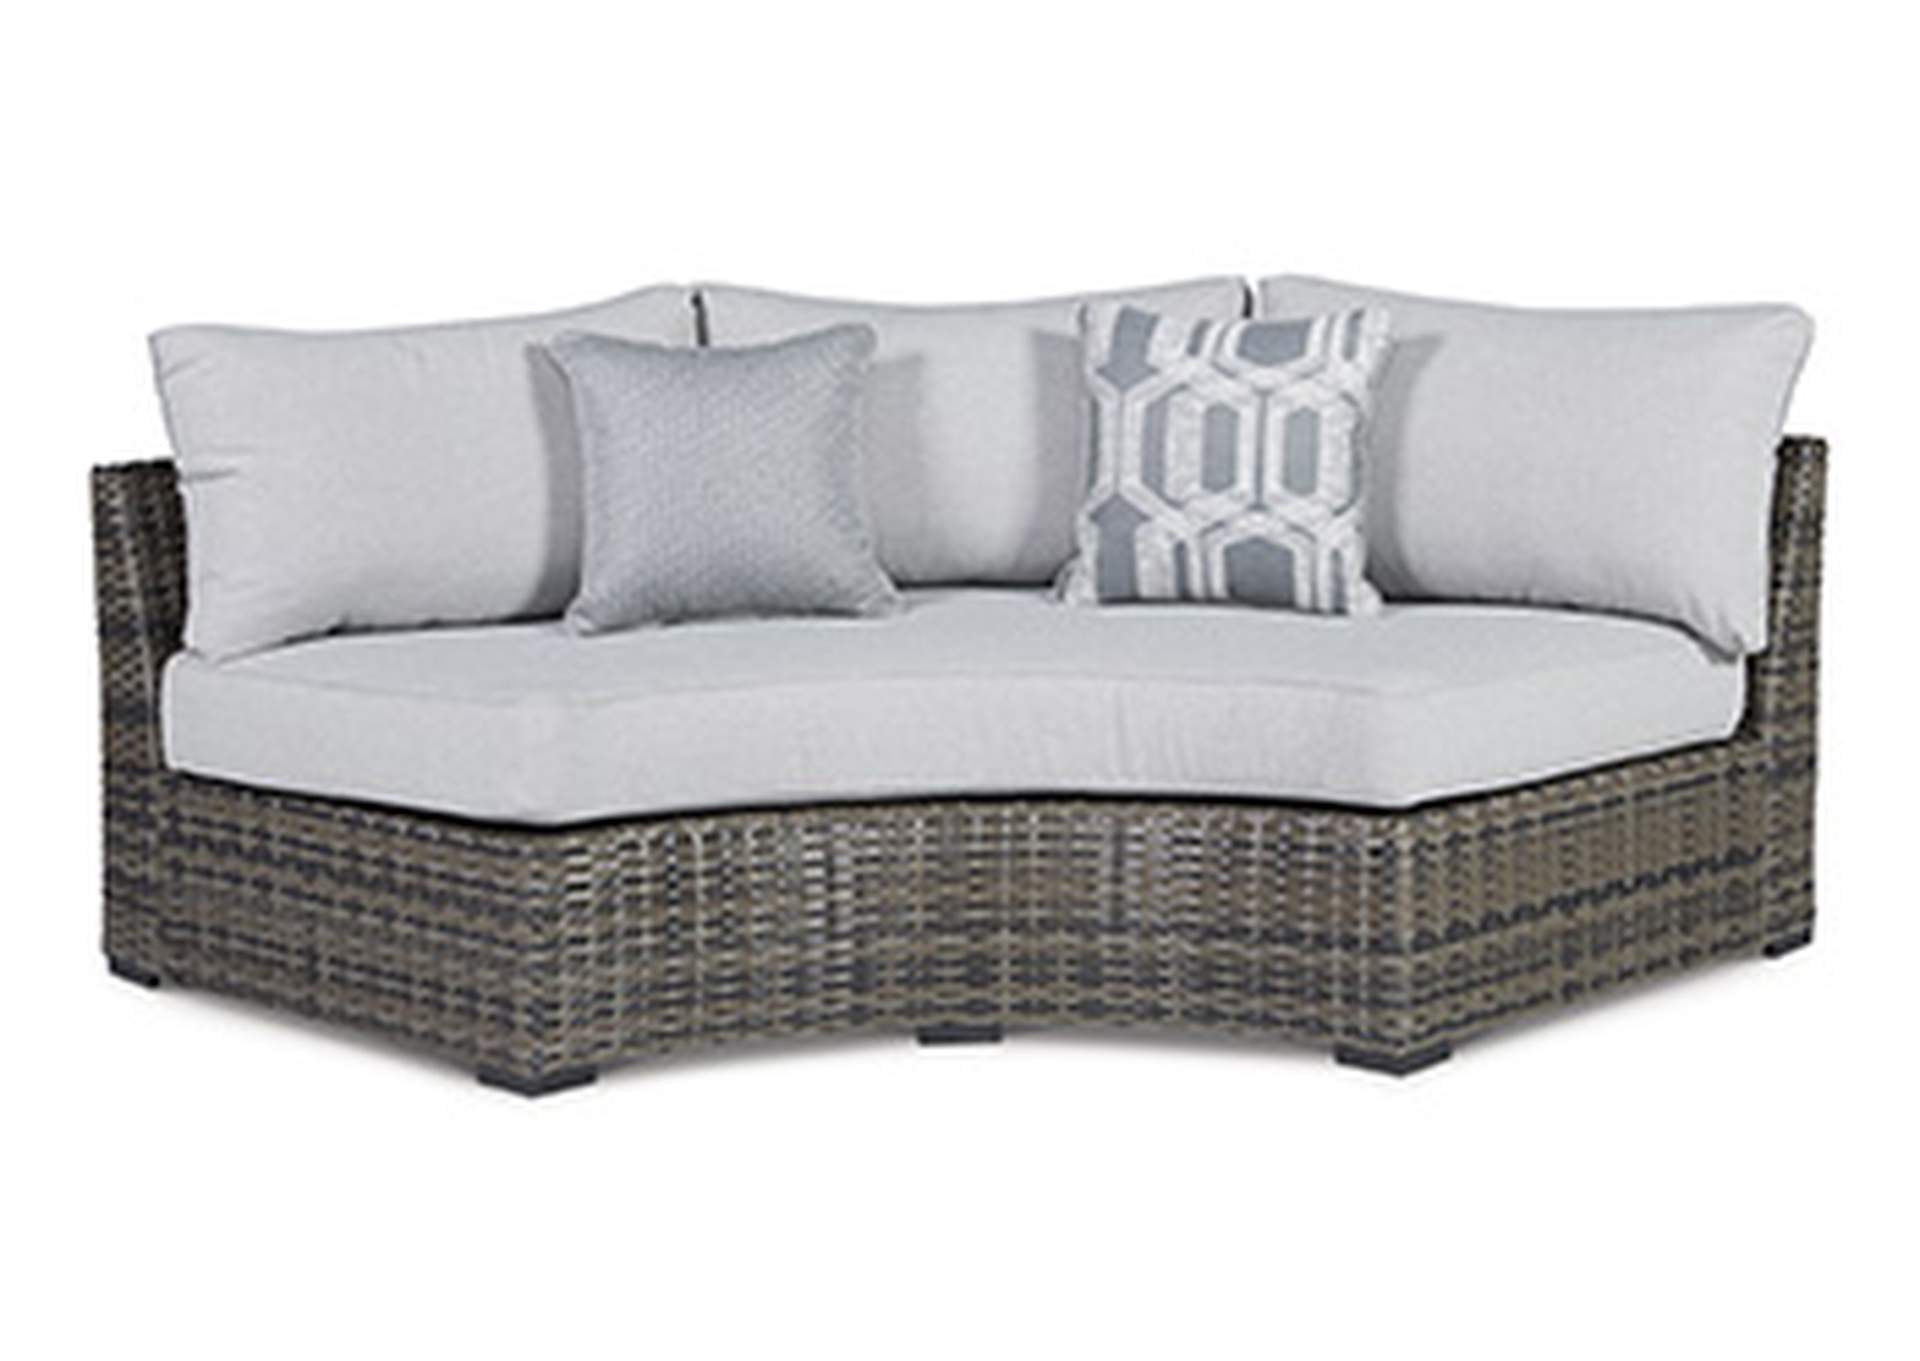 Harbor Court Curved Loveseat with Cushion,Outdoor By Ashley